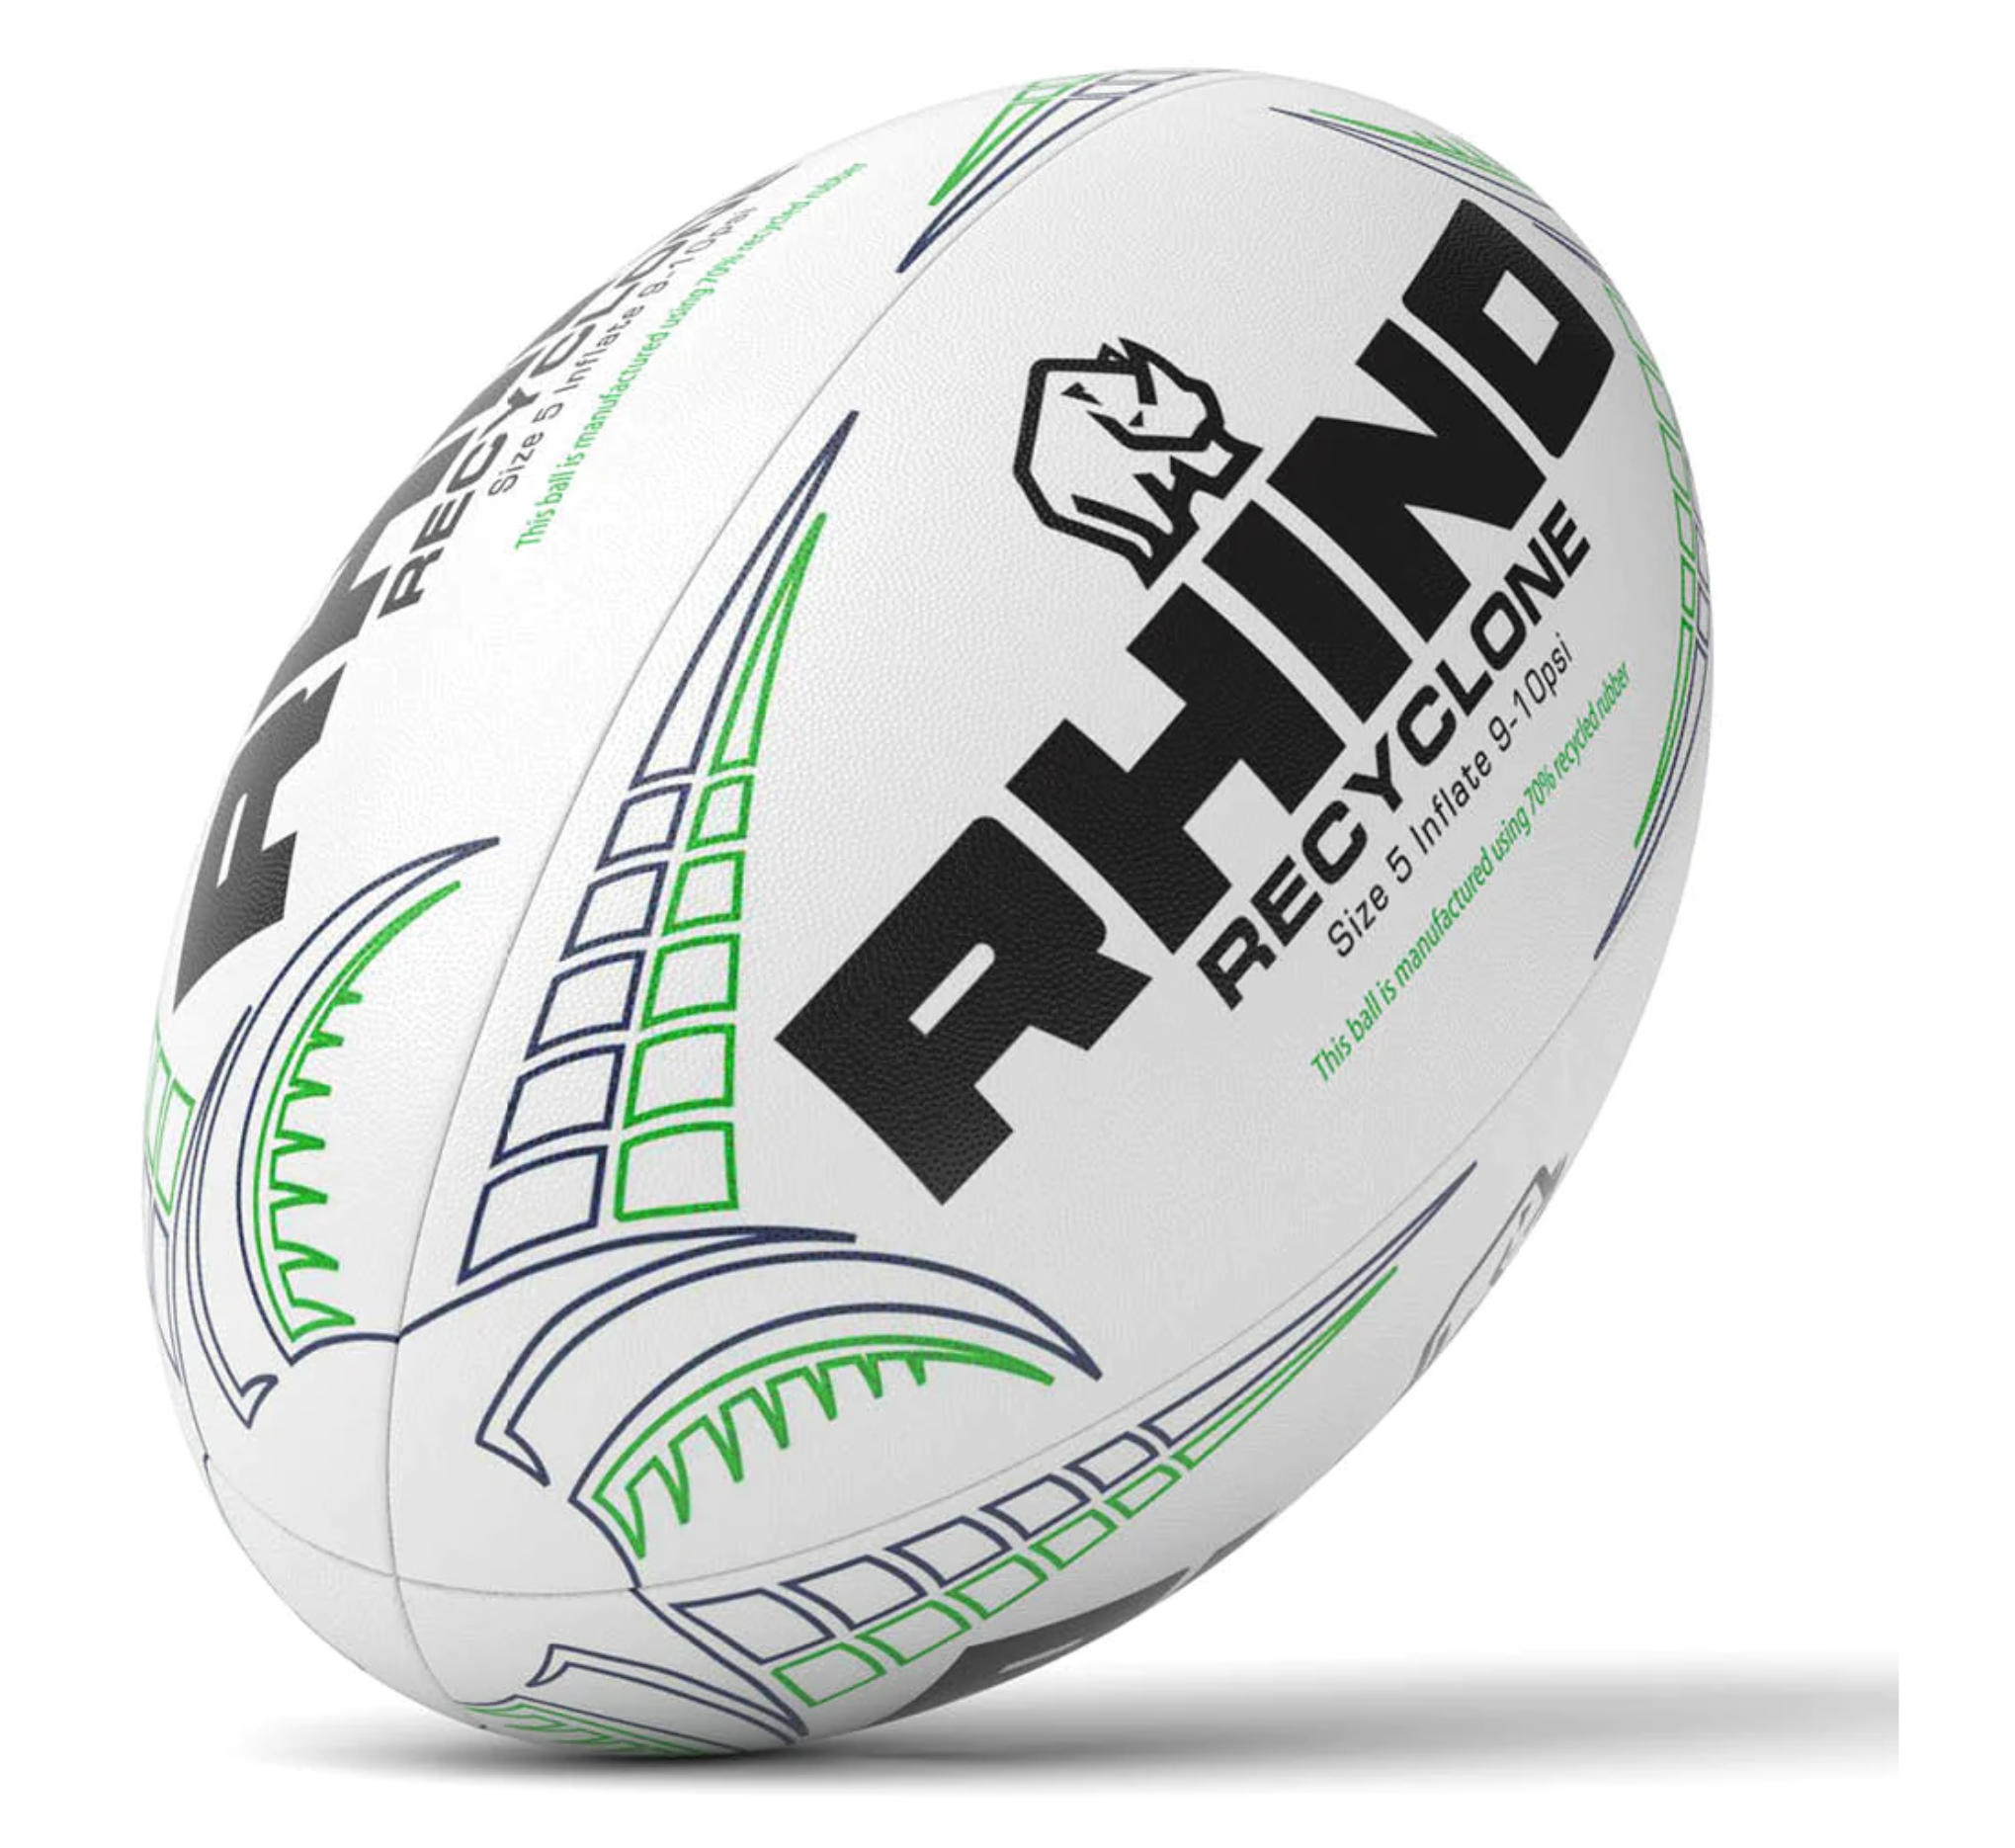 Rhino Recyclone Recycled Rugby Ball